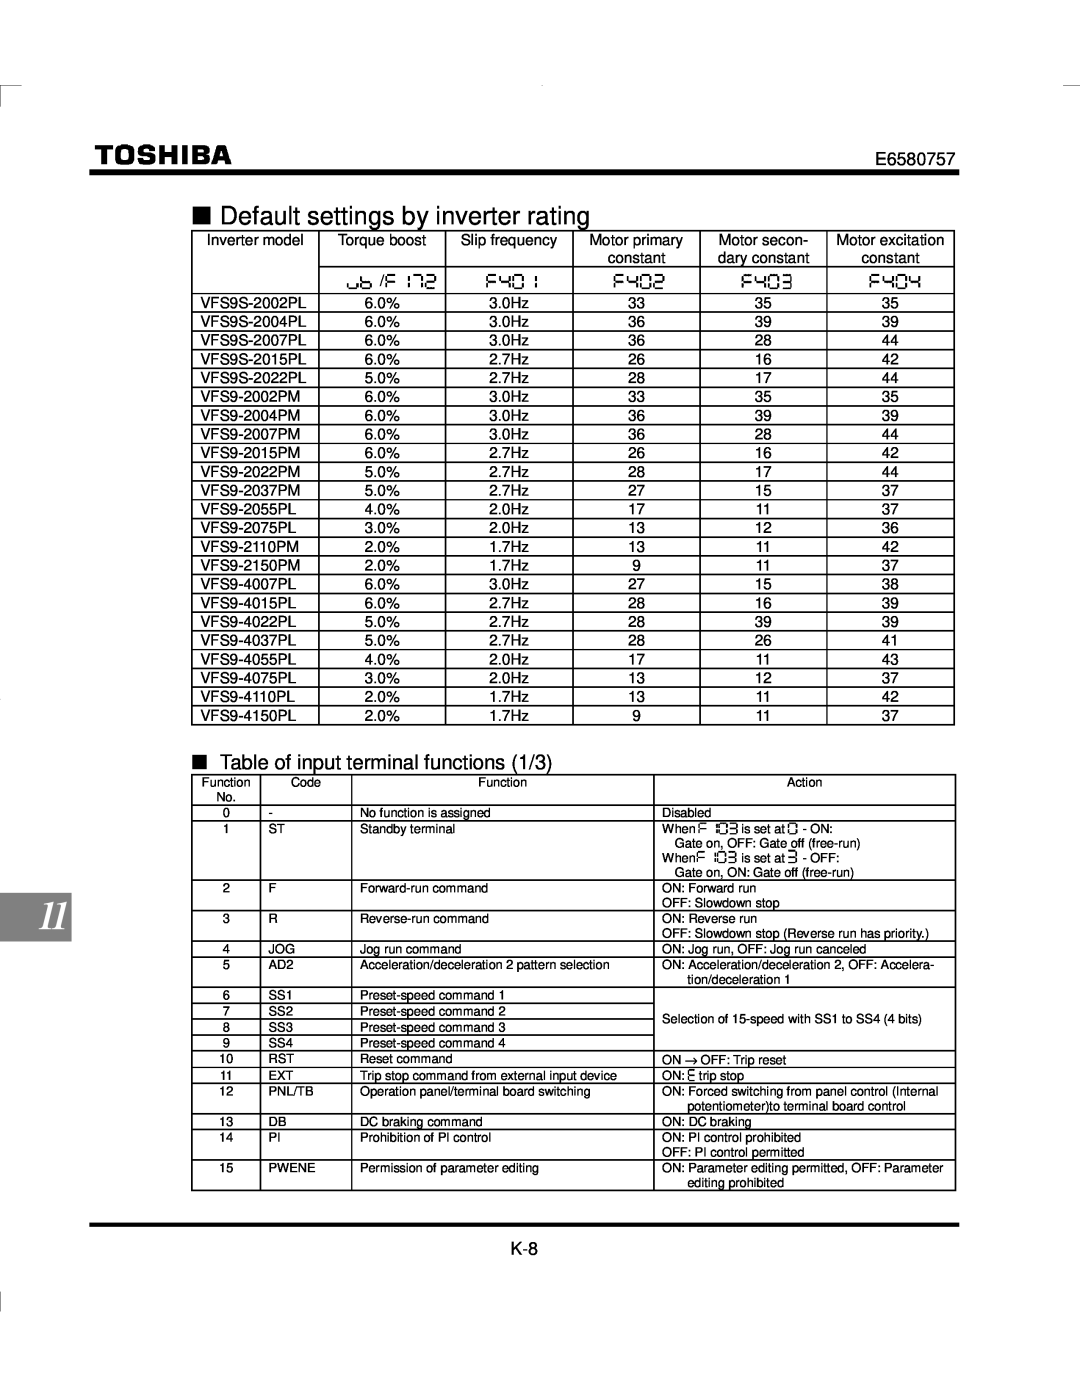 Toshiba VF-S9 manual Default settings by inverter rating, Table of input terminal functions 1/3 